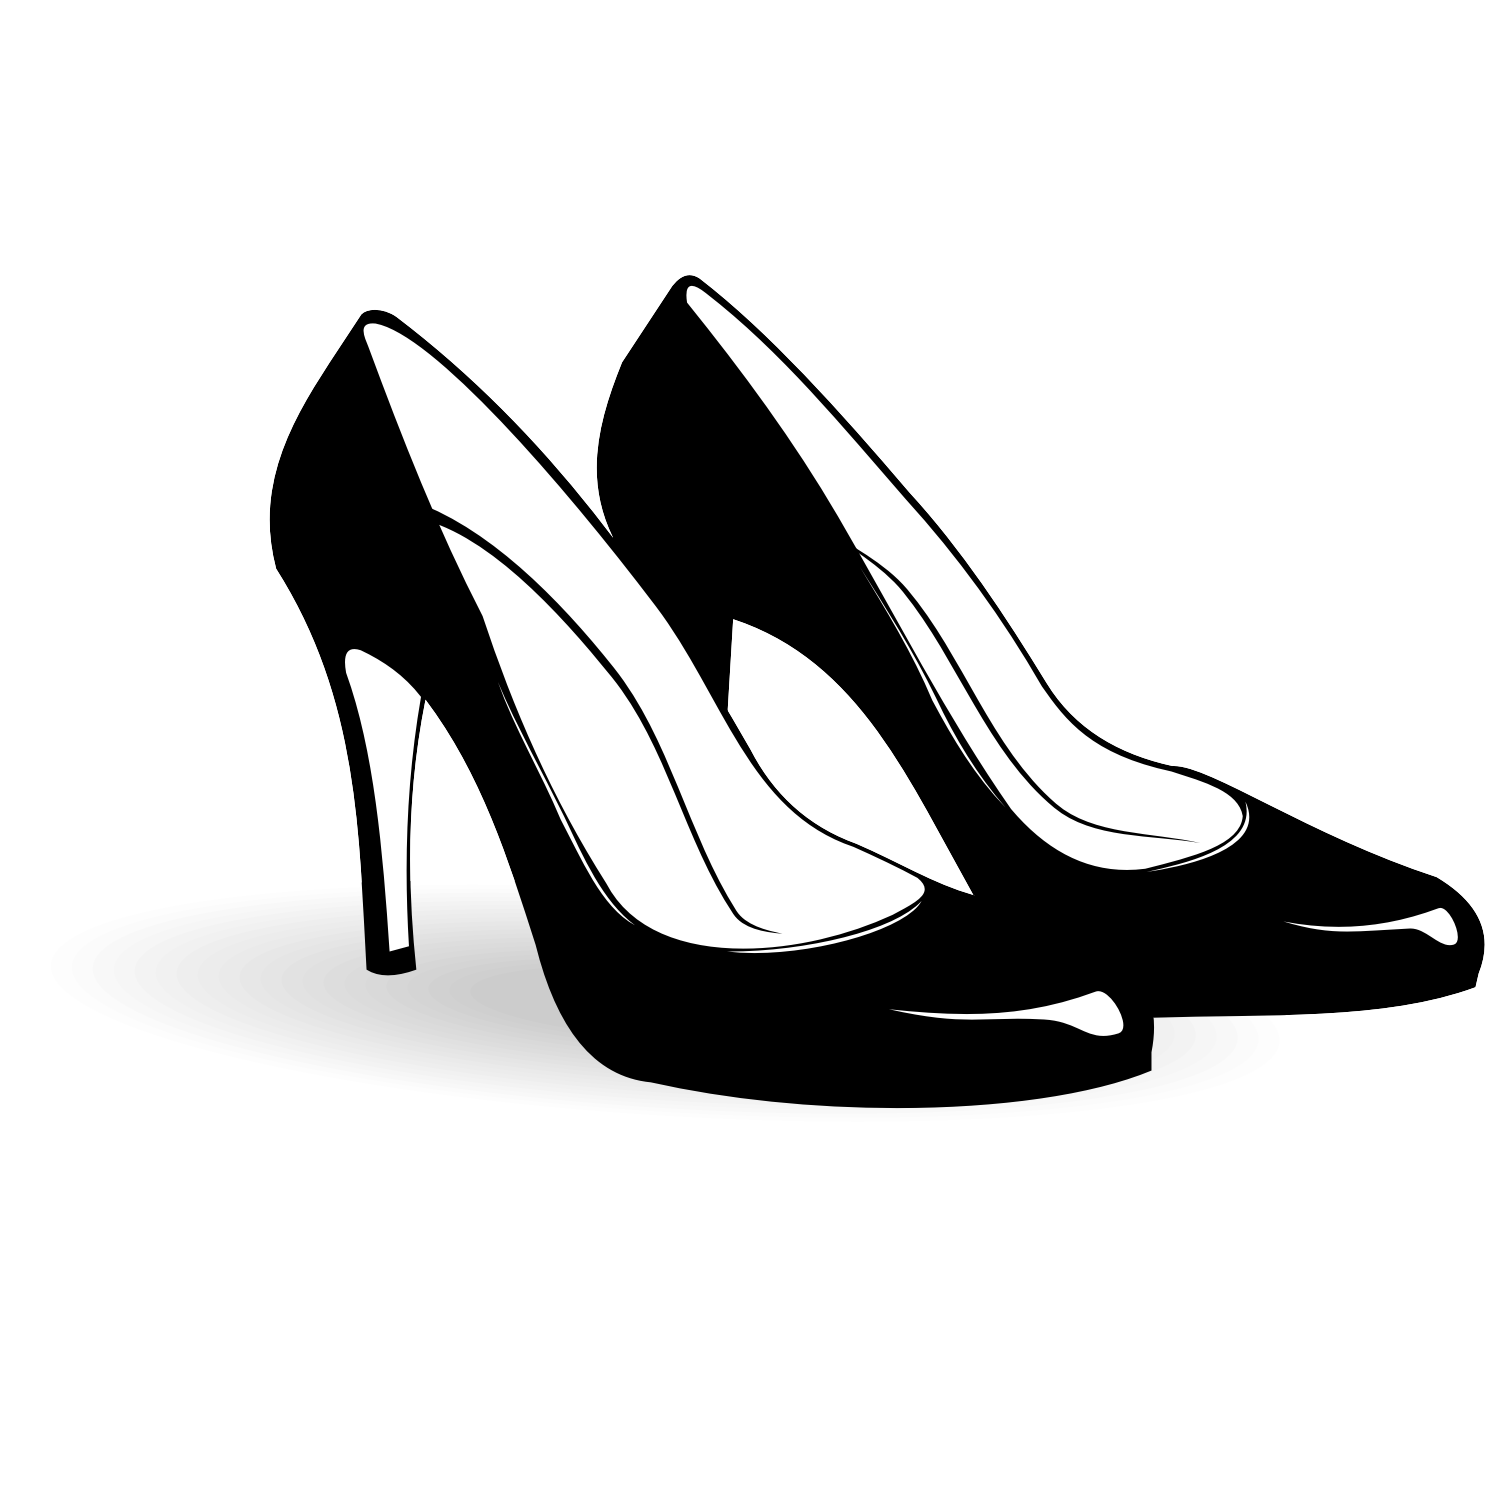 Vector for free use: Women's shoes